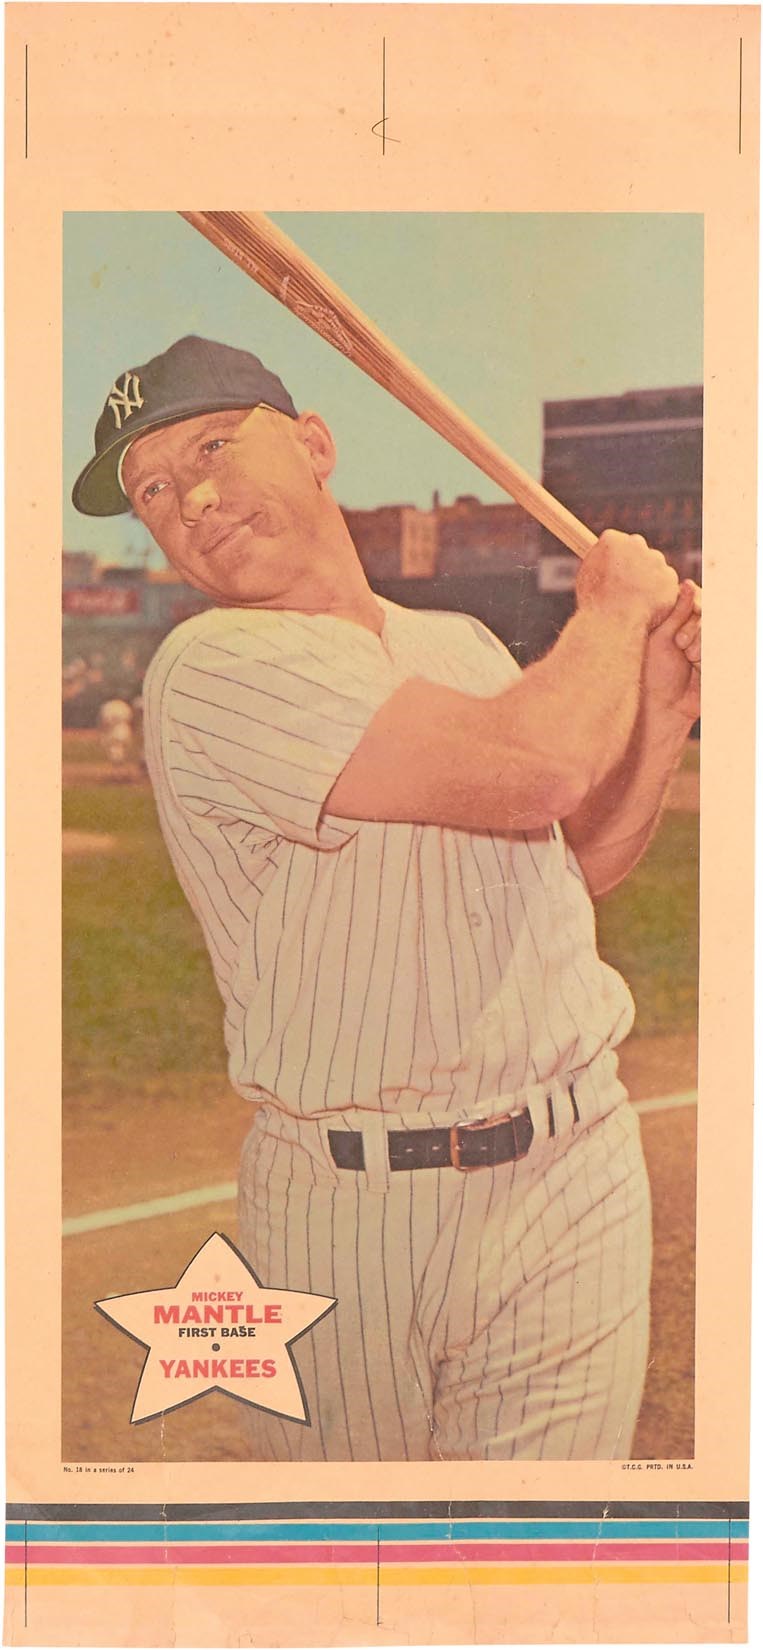 Baseball and Trading Cards - 1968 Mickey Mantle Topps Poster One of a Kind Proof